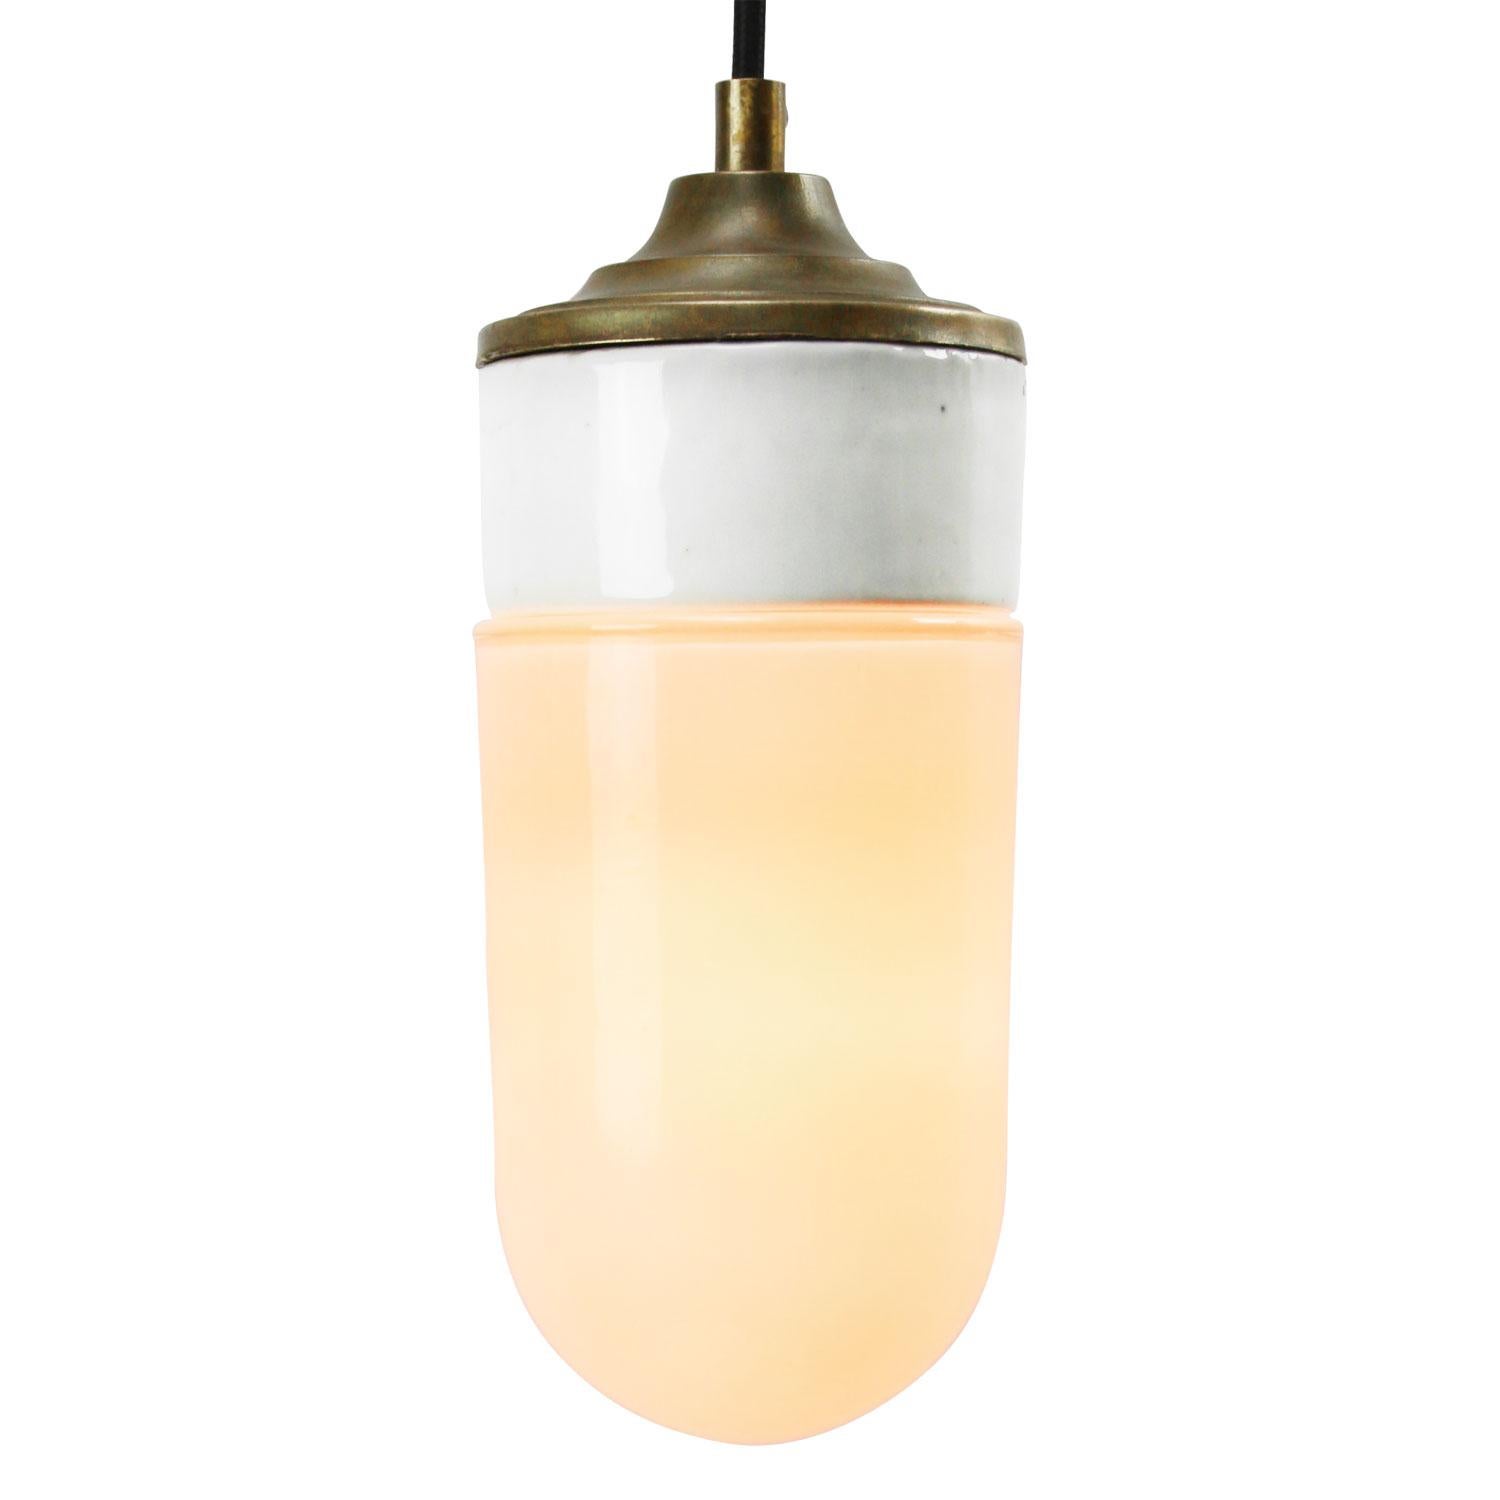 Porcelain industrial hanging lamp.
White porcelain, brass and opaline glass.
2 conductors, no ground.

Weight: 1.20 kg / 2.6 lb

Priced per individual item. All lamps have been made suitable by international standards for incandescent light bulbs,